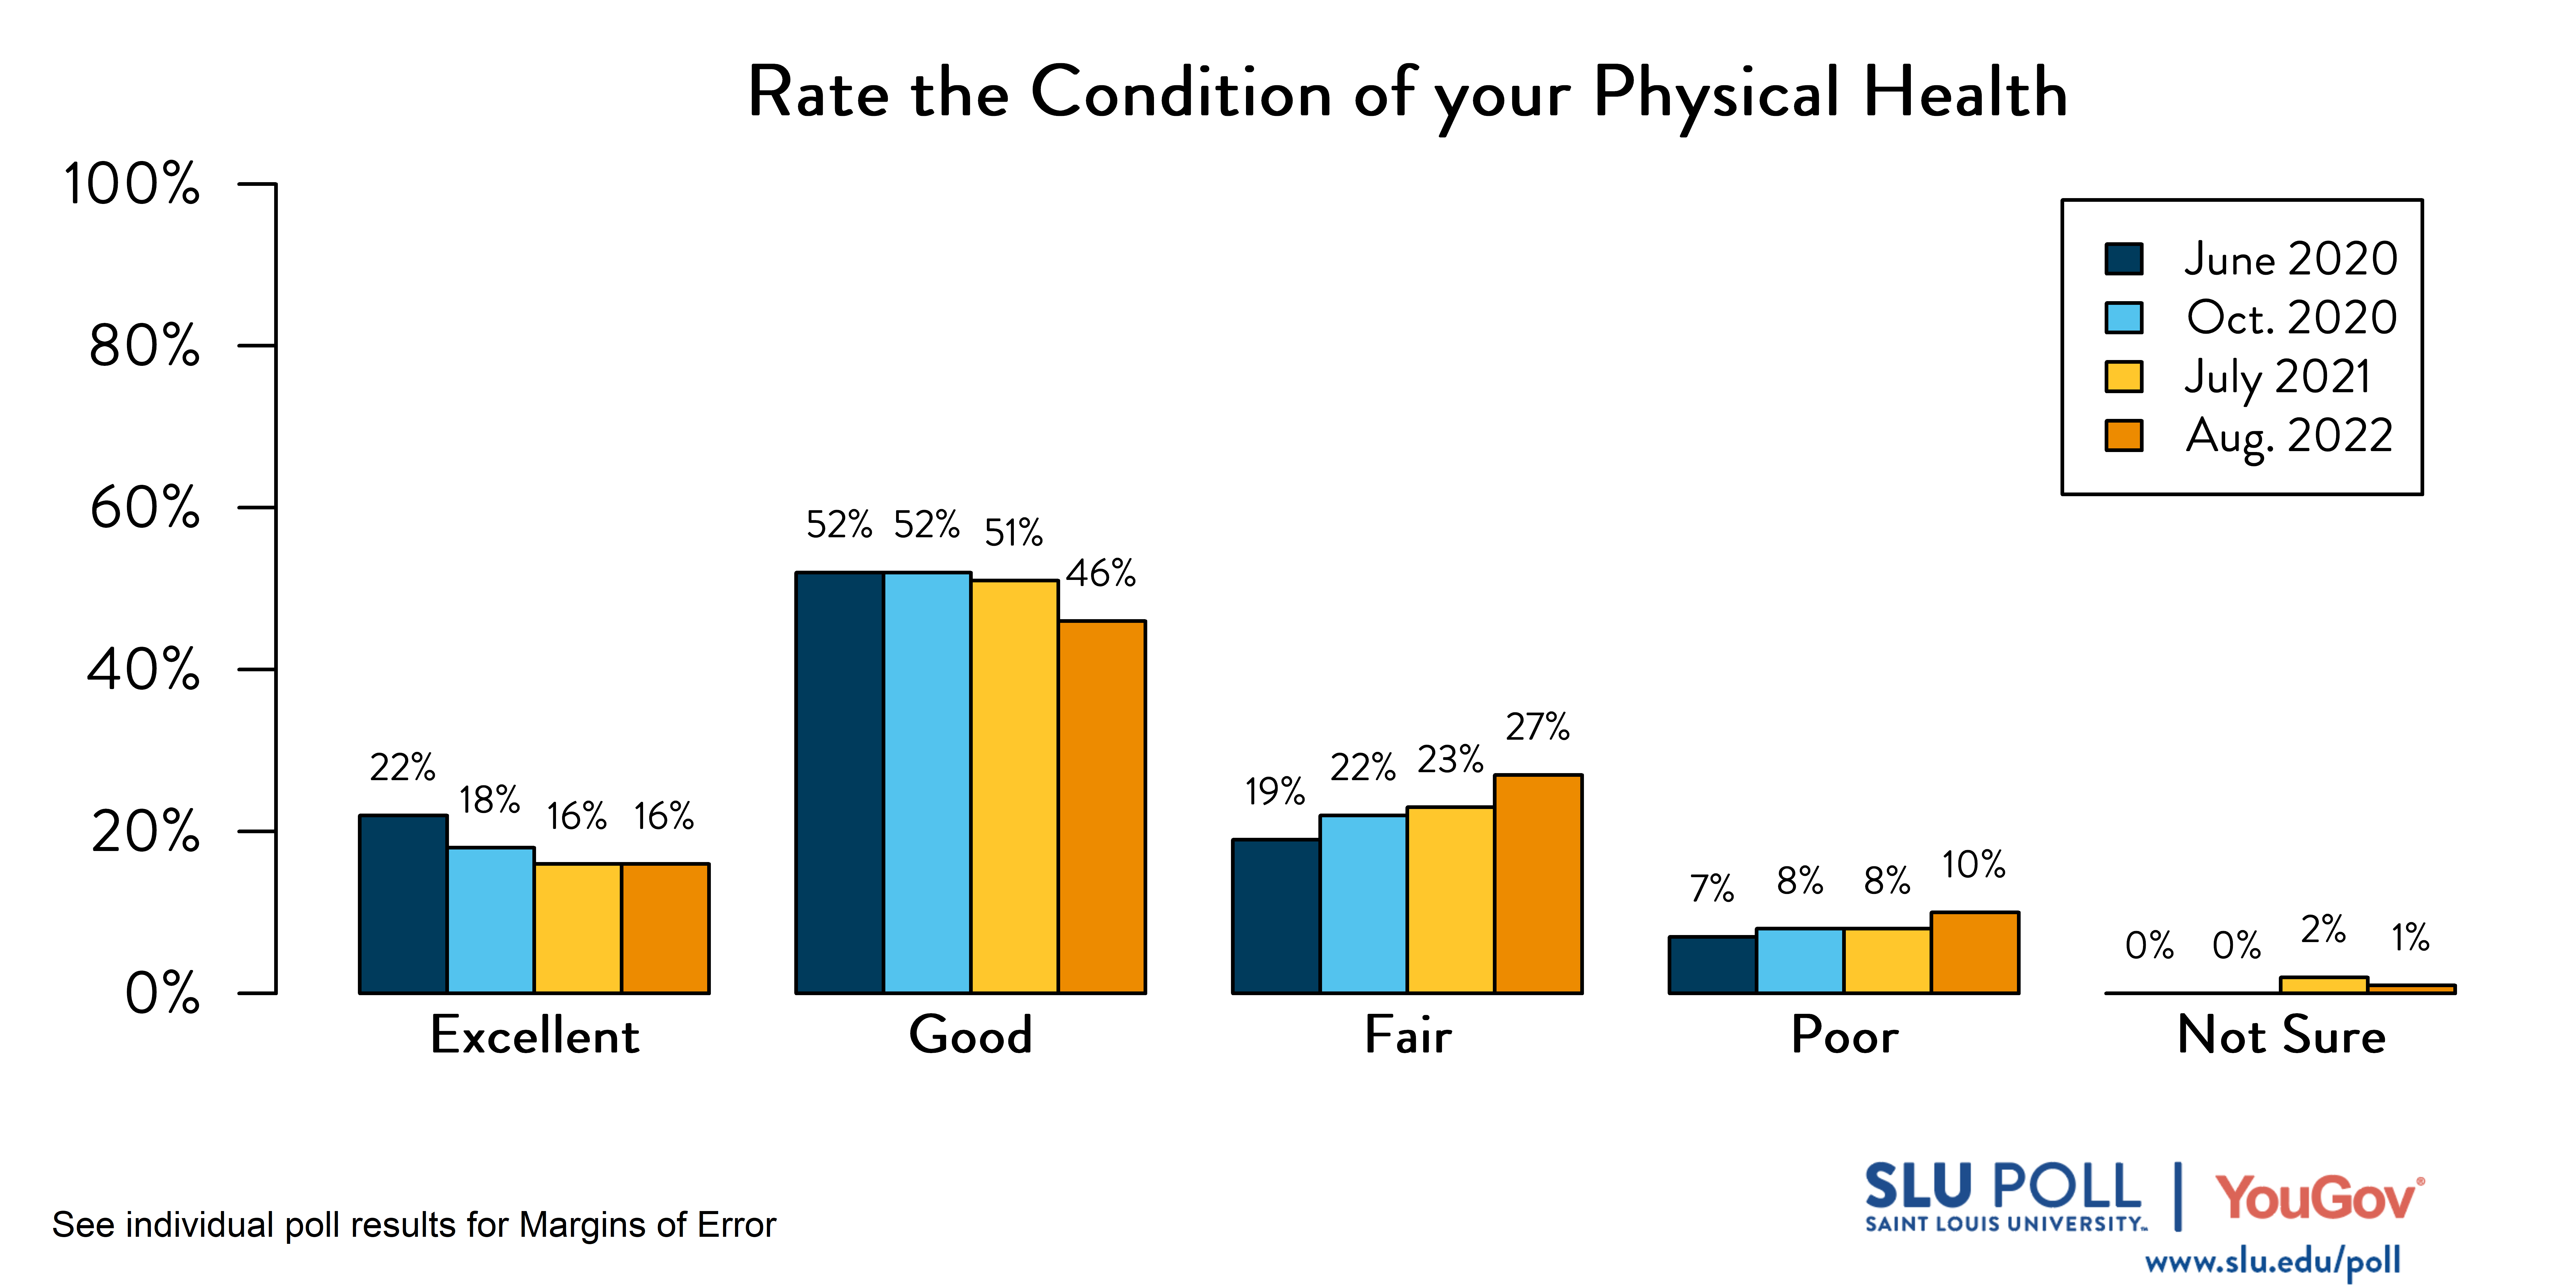 Likely voters' responses to 'How would you rate the following: Your physical health in the last month?'. June 2020 Voter Responses 22% Excellent, 52% Good, 19% Fair, 7% Poor, and 0% Not sure. October 2020 Voter Responses: 18% Excellent, 52% Good, 22% Fair, 8% Poor, and 0% Not sure. July 2021 Voter Responses: 16% Excellent, 51% Good, 23% Fair, 8% Poor, and 2% Not sure. August 2021 Voter Responses: 16% Excellent, 46% Good, 27% Fair, 10% Poor, and 1% Not sure.